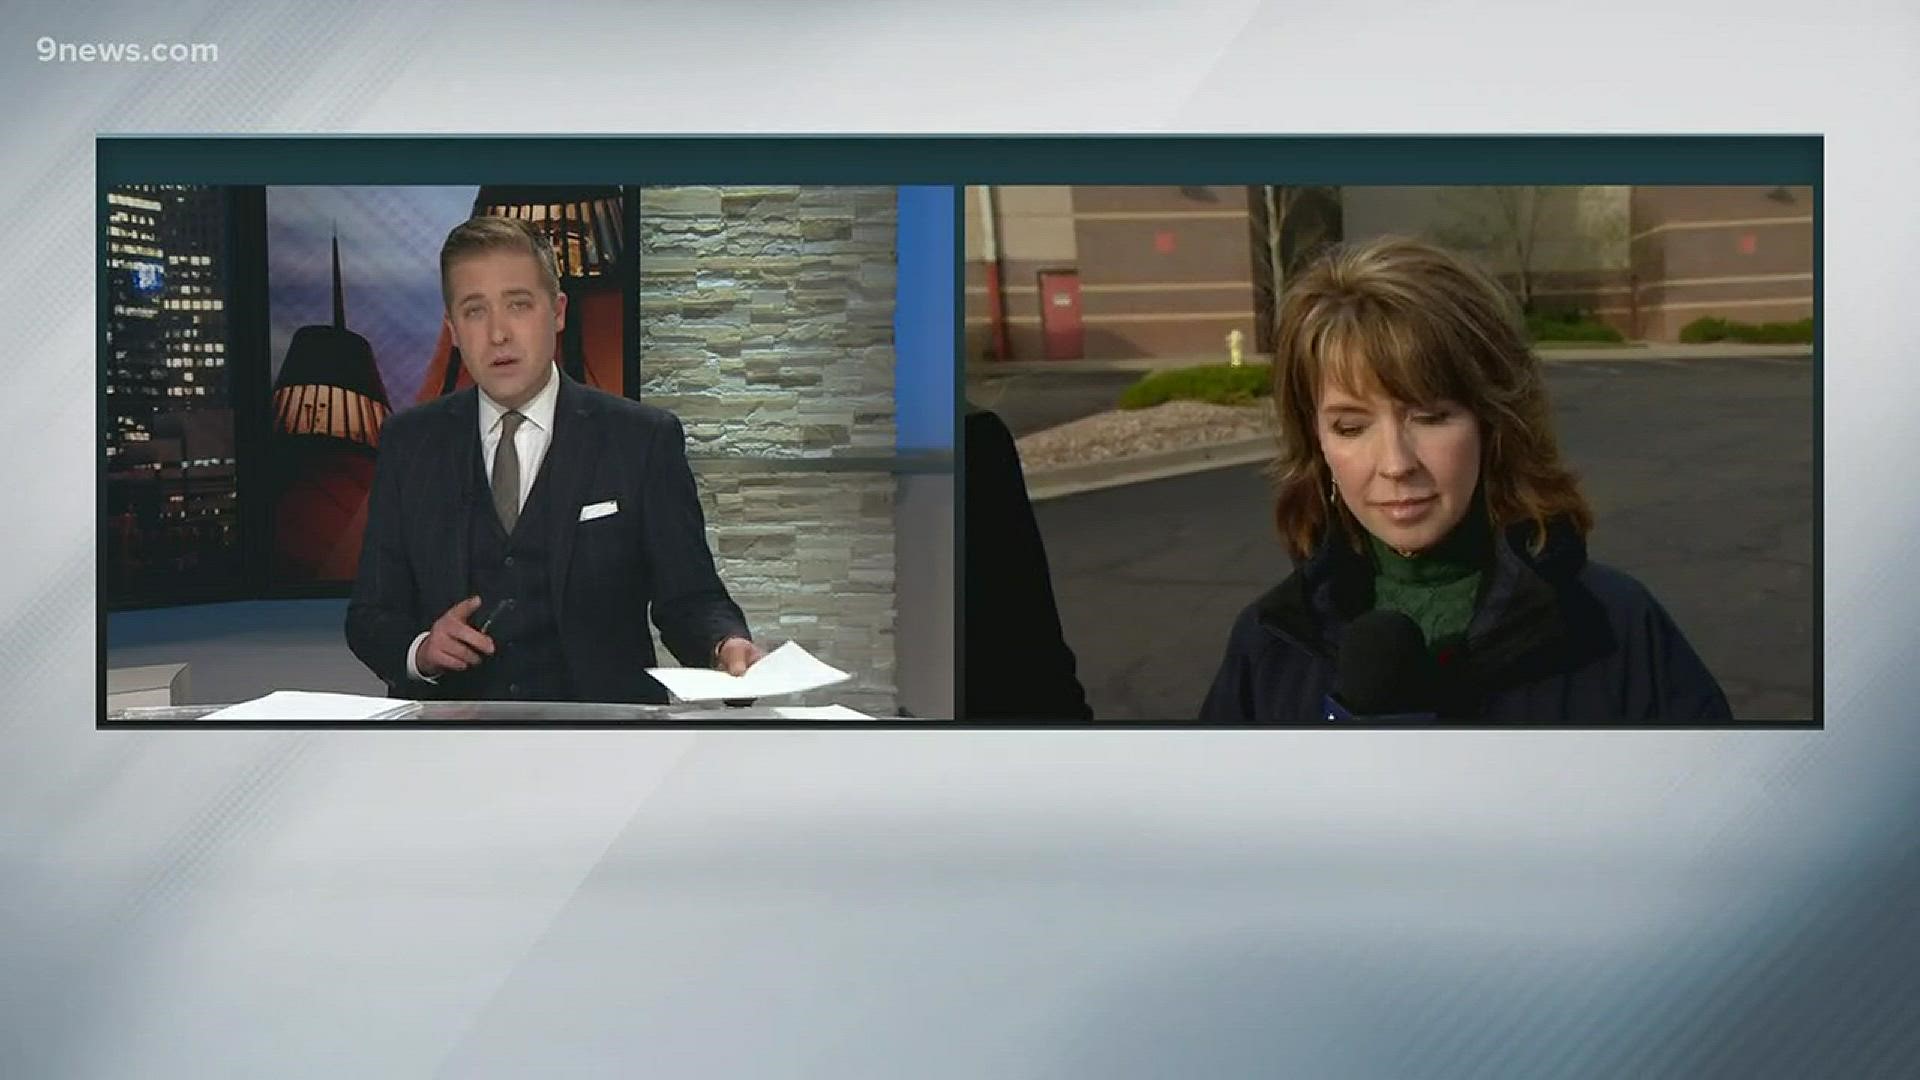 Susan Payne, founder of Safe2Tell, spoke with us following the shooting at Stem School Highlands Ranch.